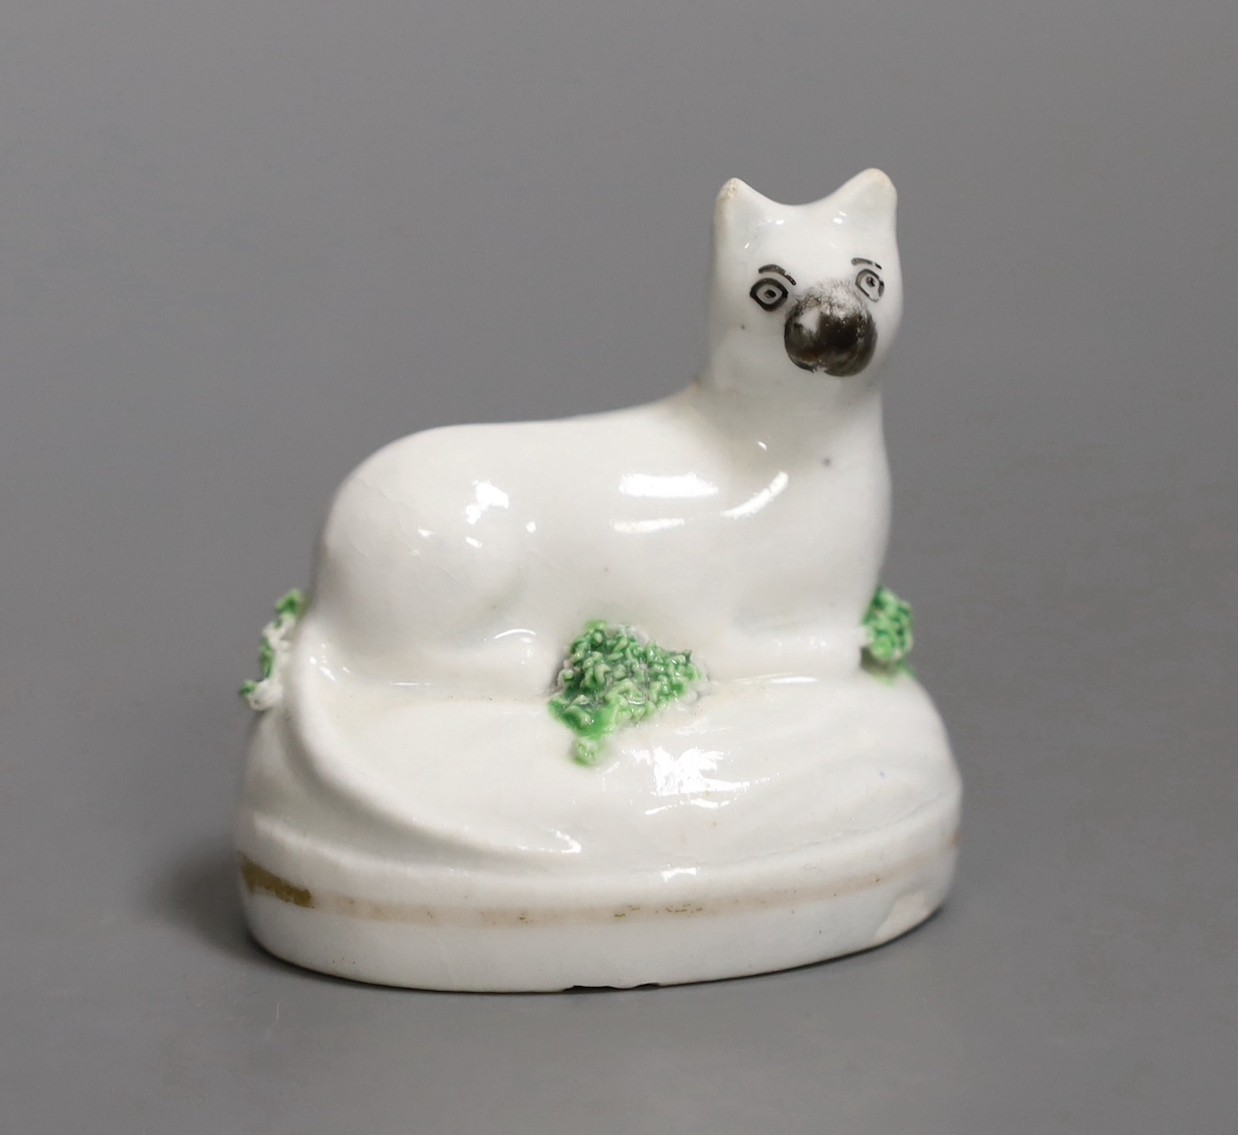 A rare Staffordshire porcelain figure of a recumbent cat, c.1830-50, 4.7cm, Not recorded in Dennis G.Rice, Cats in English porcelain., Provenance: Dennis G.Rice collection